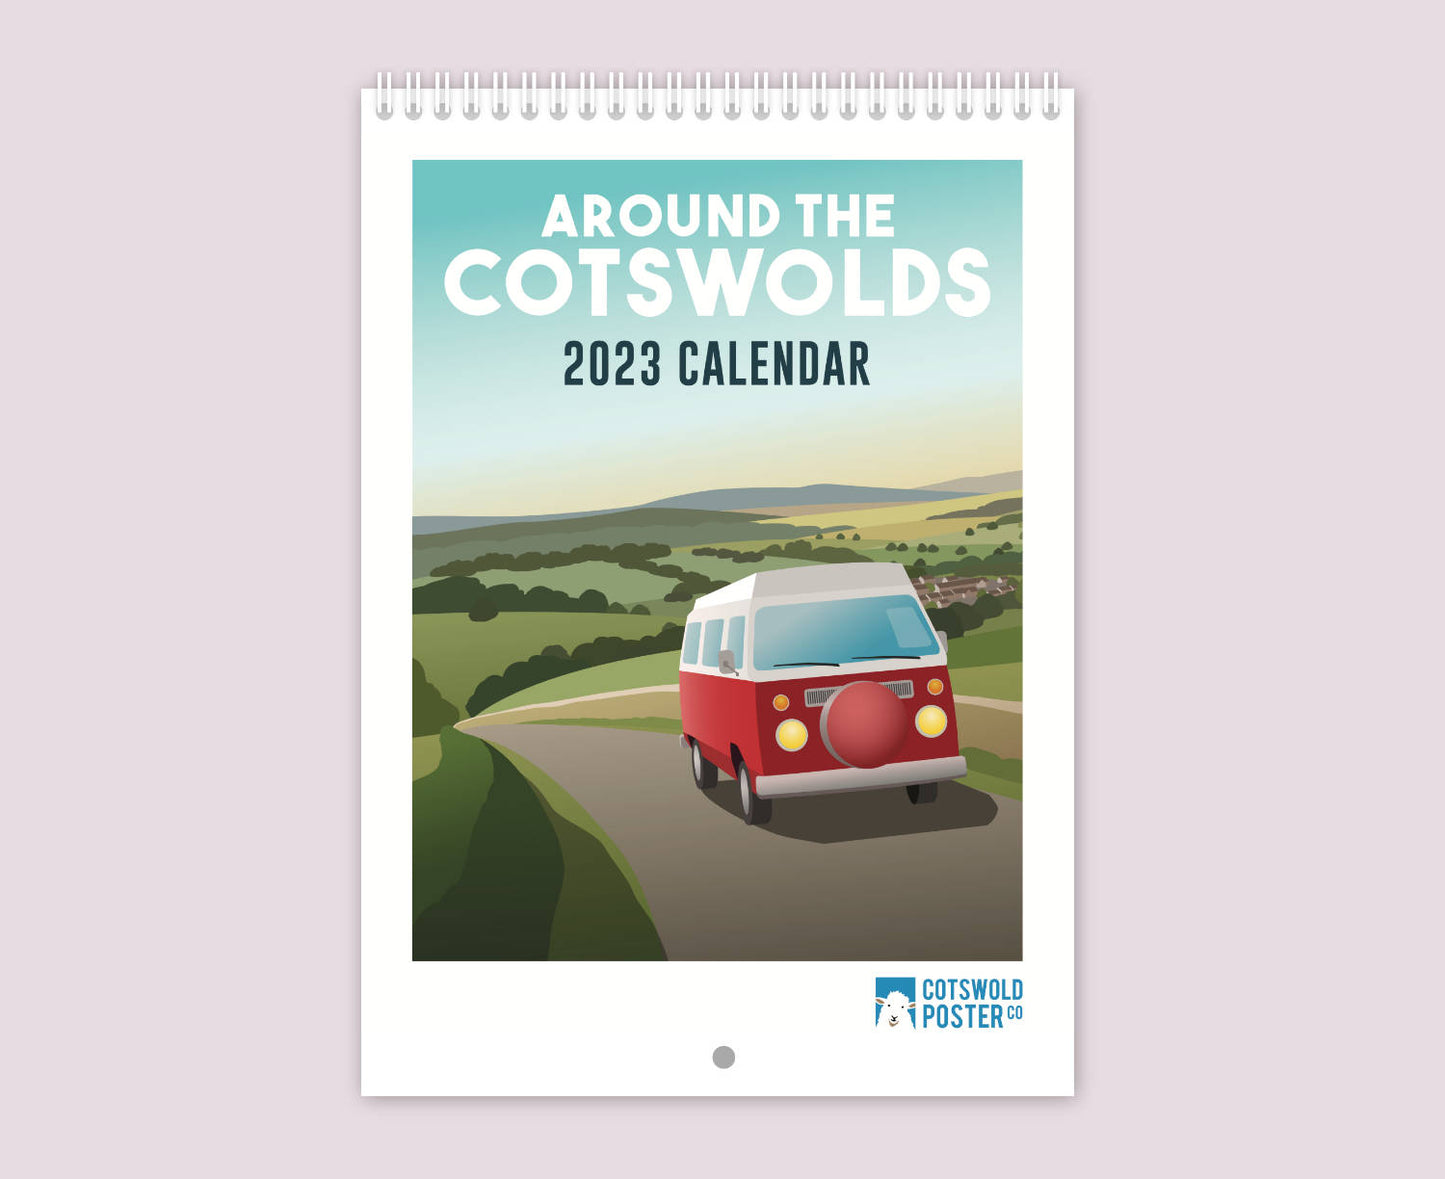 Around the Cotswolds 2023 Calendar